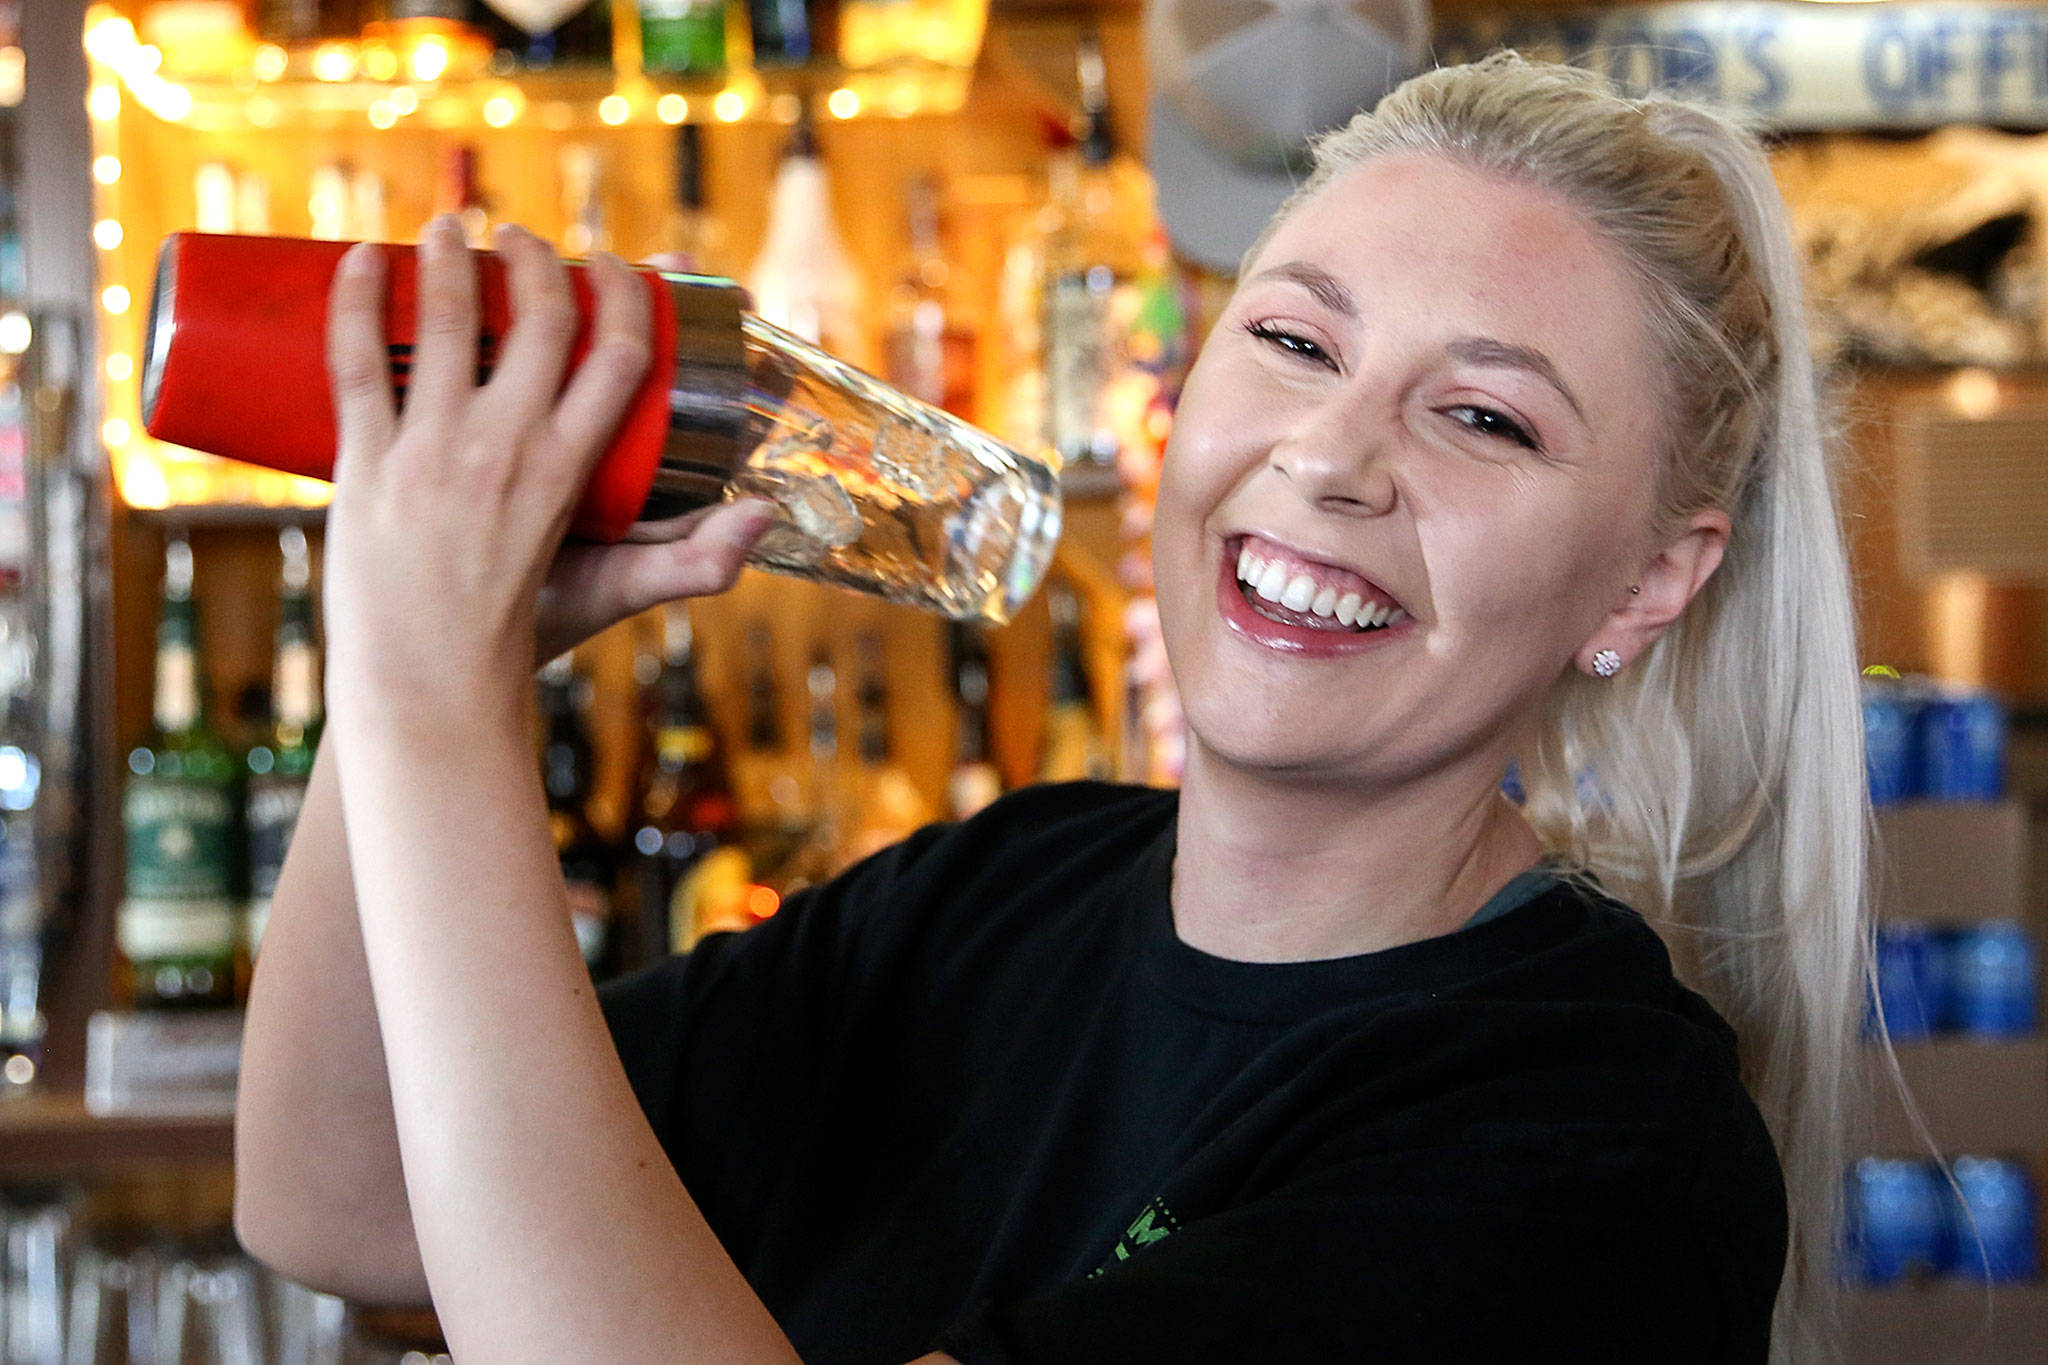 Jessie Meyers, a bartender at Twisted Lime Pub in Mill Creek, would make J.K. Rowling an old fashioned if she had the chance. (Kevin Clark / The Herald)